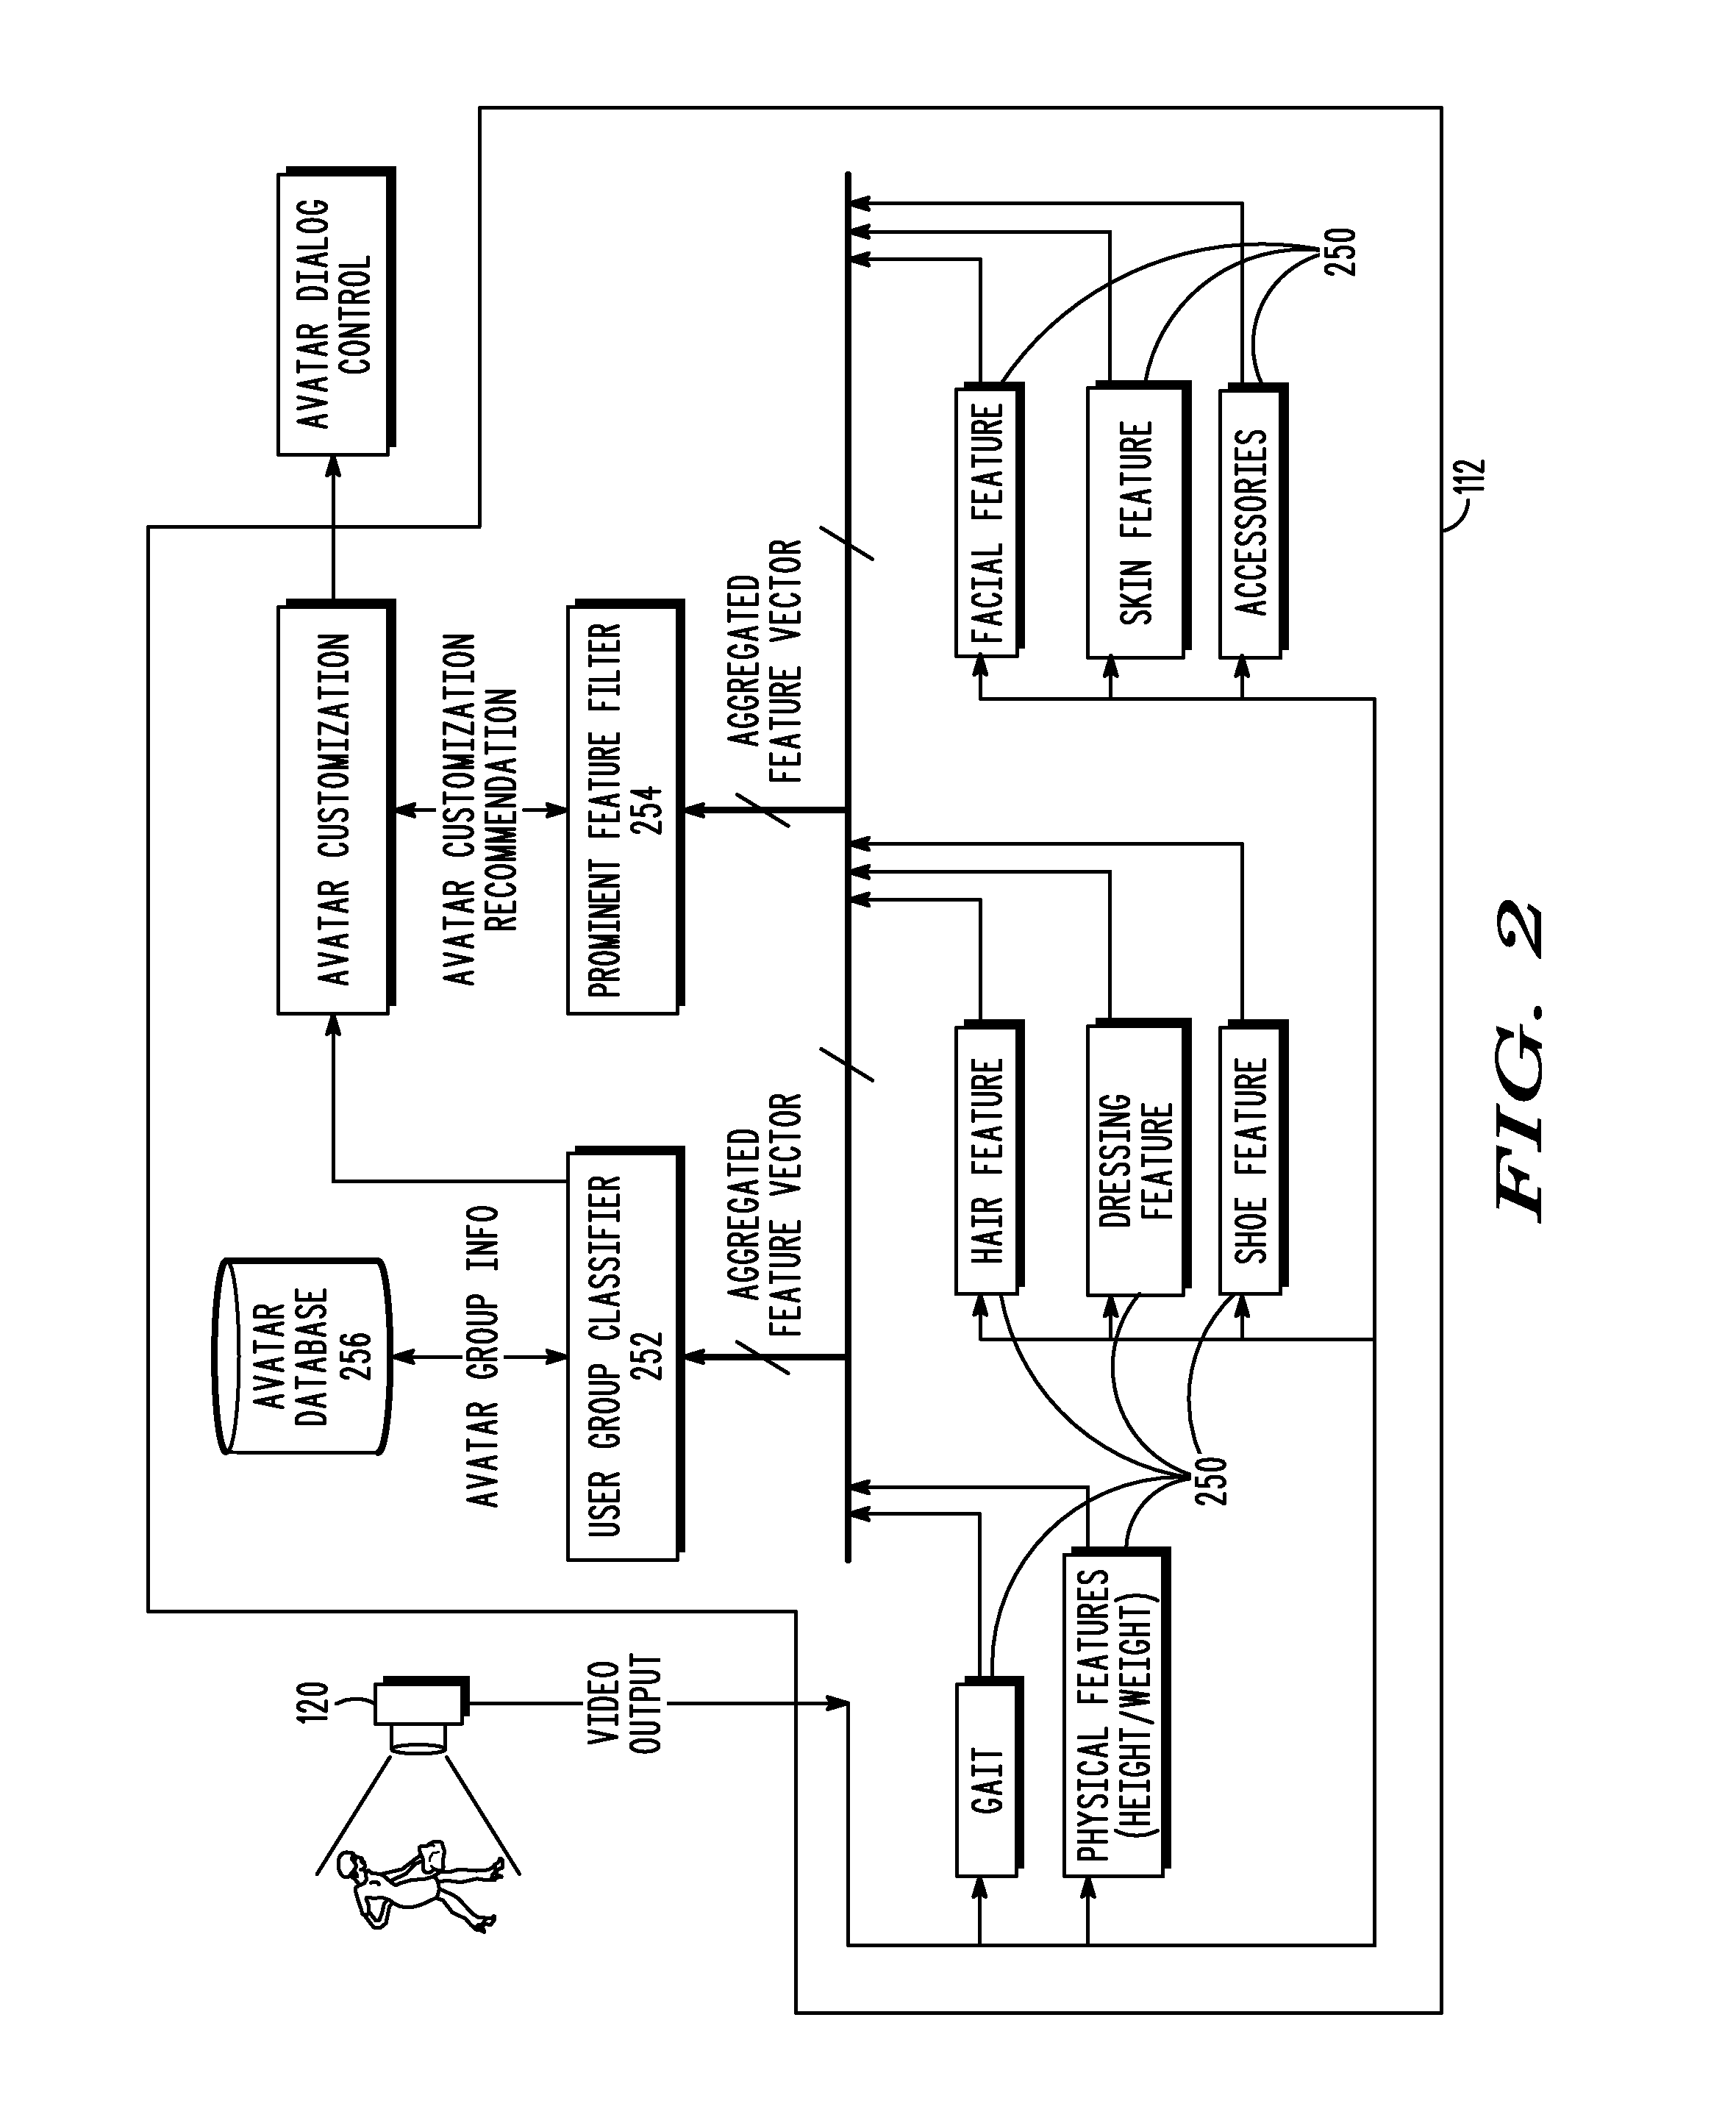 Apparatus and Methods for Selecting and Customizing Avatars for Interactive Kiosks